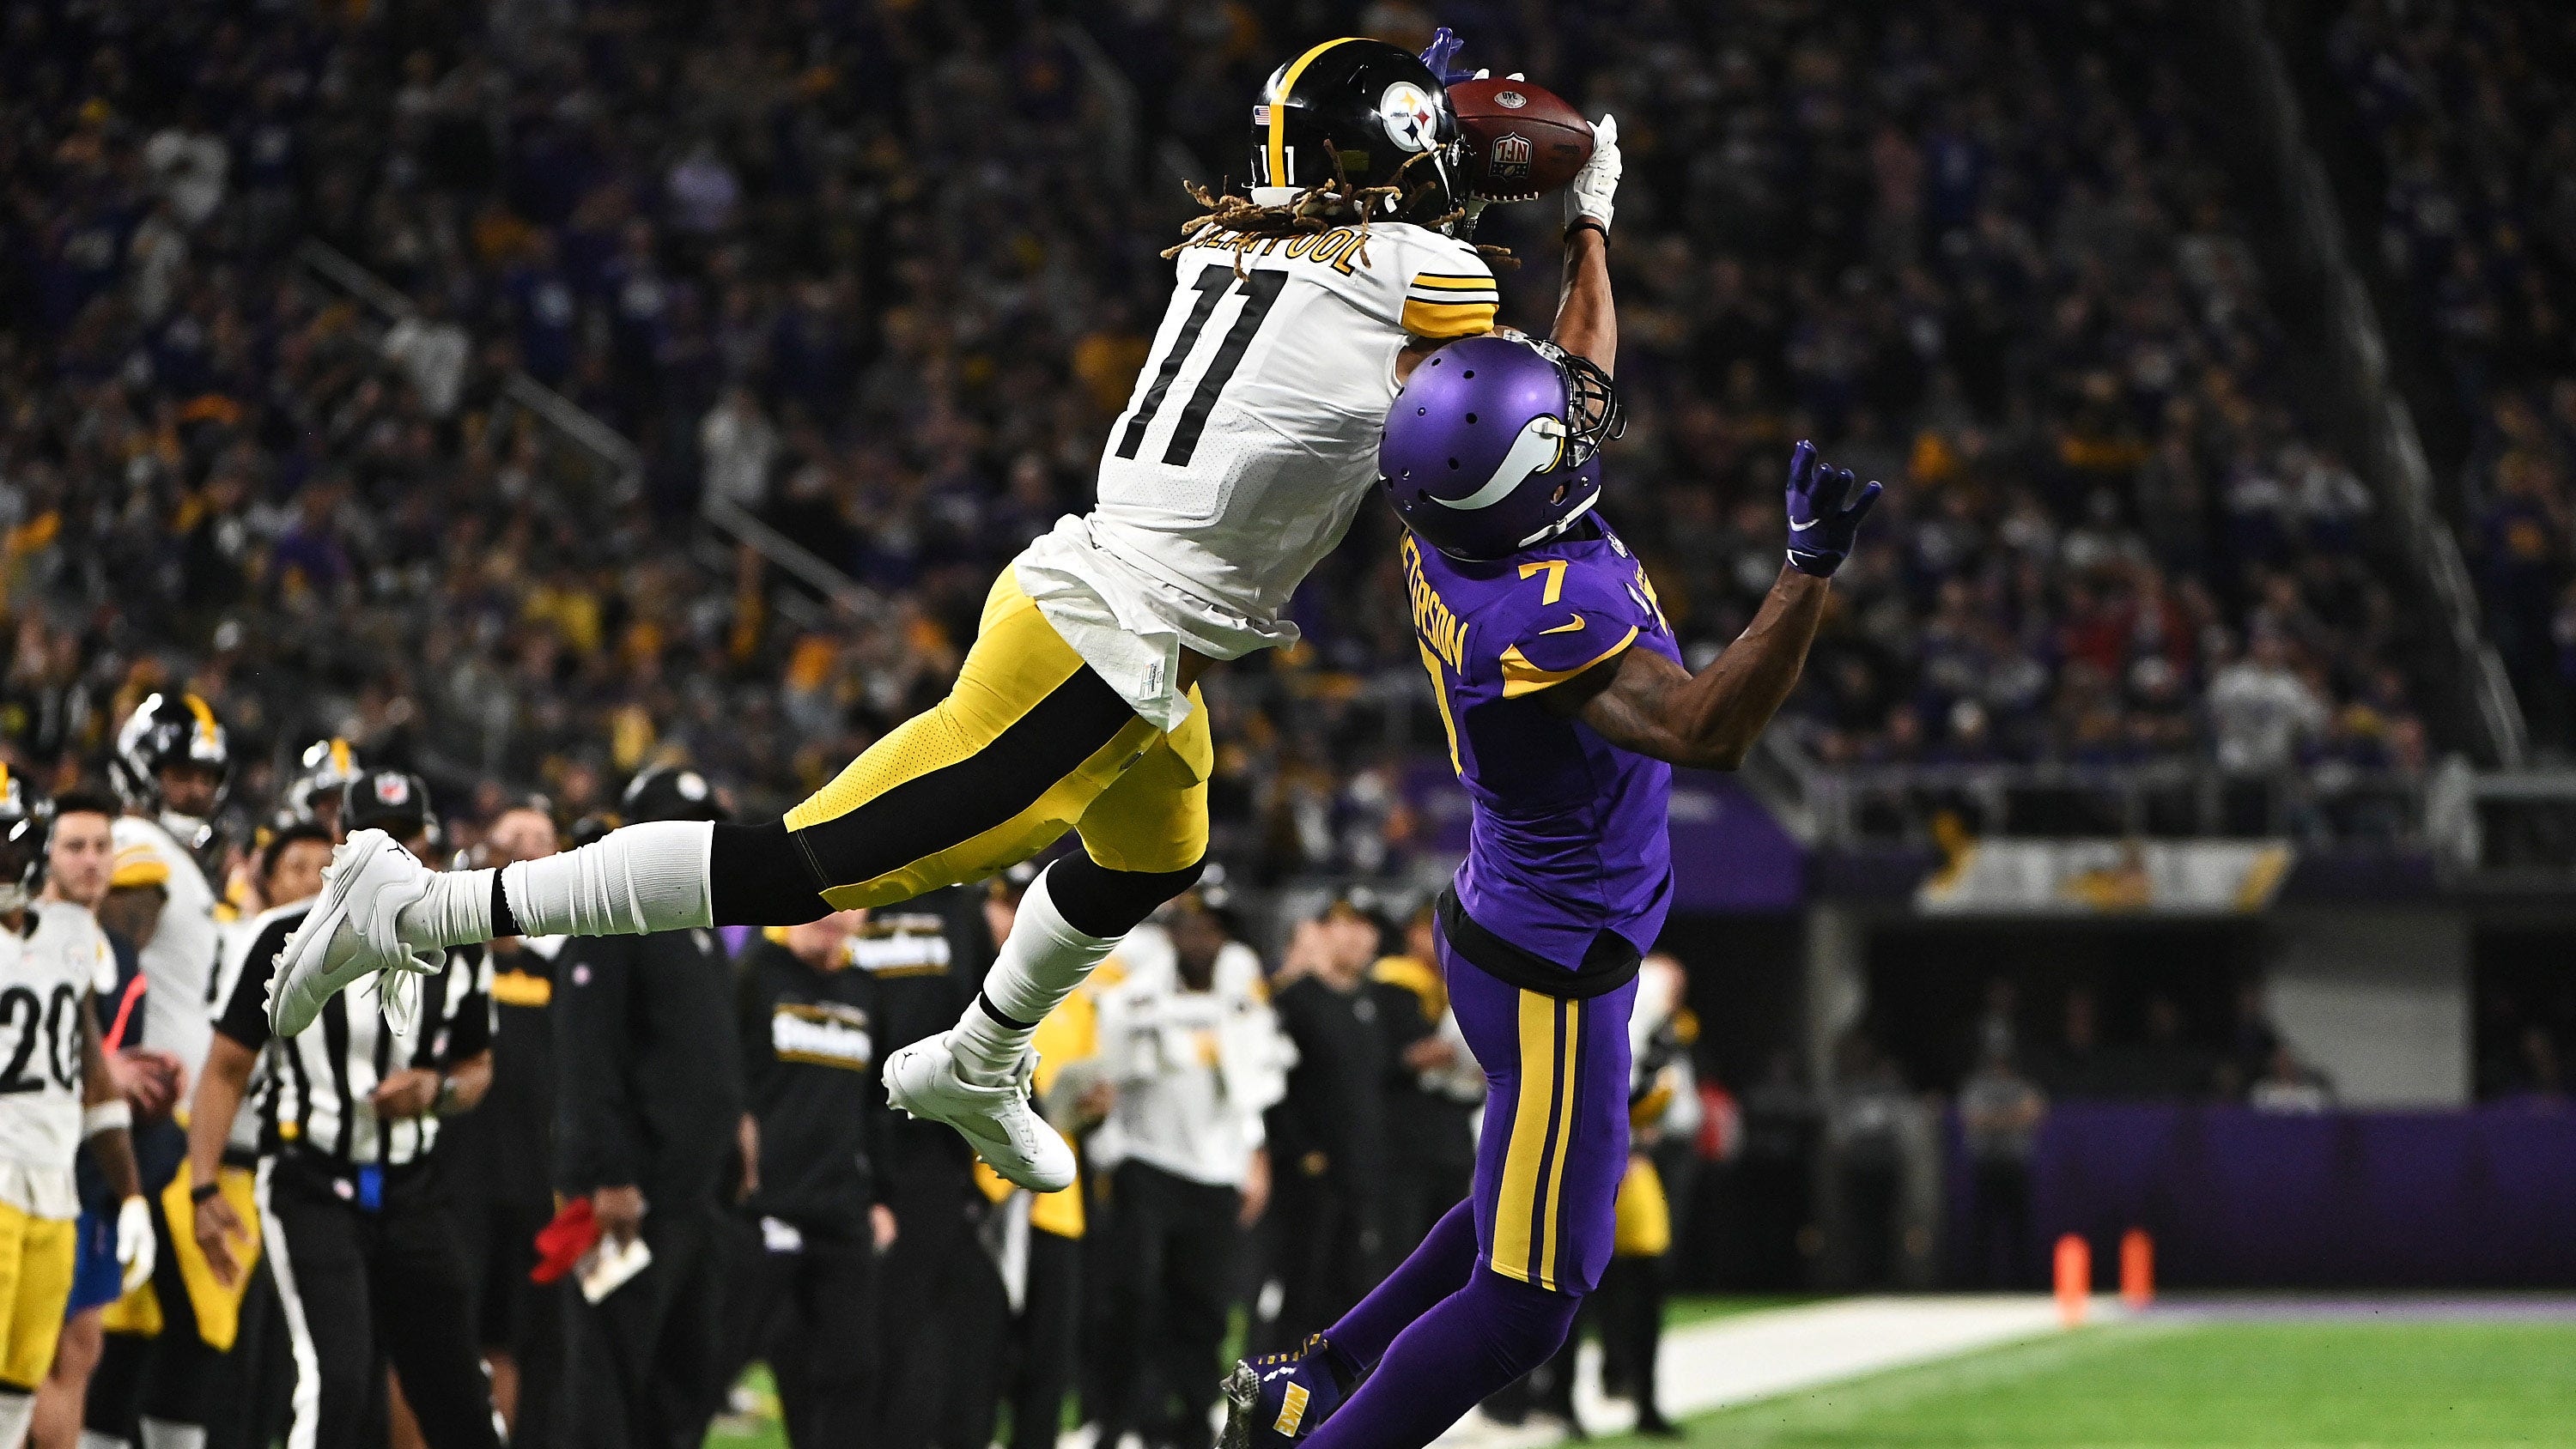 It’s Groundhog Day again as Steelers’ uneven season rolls on